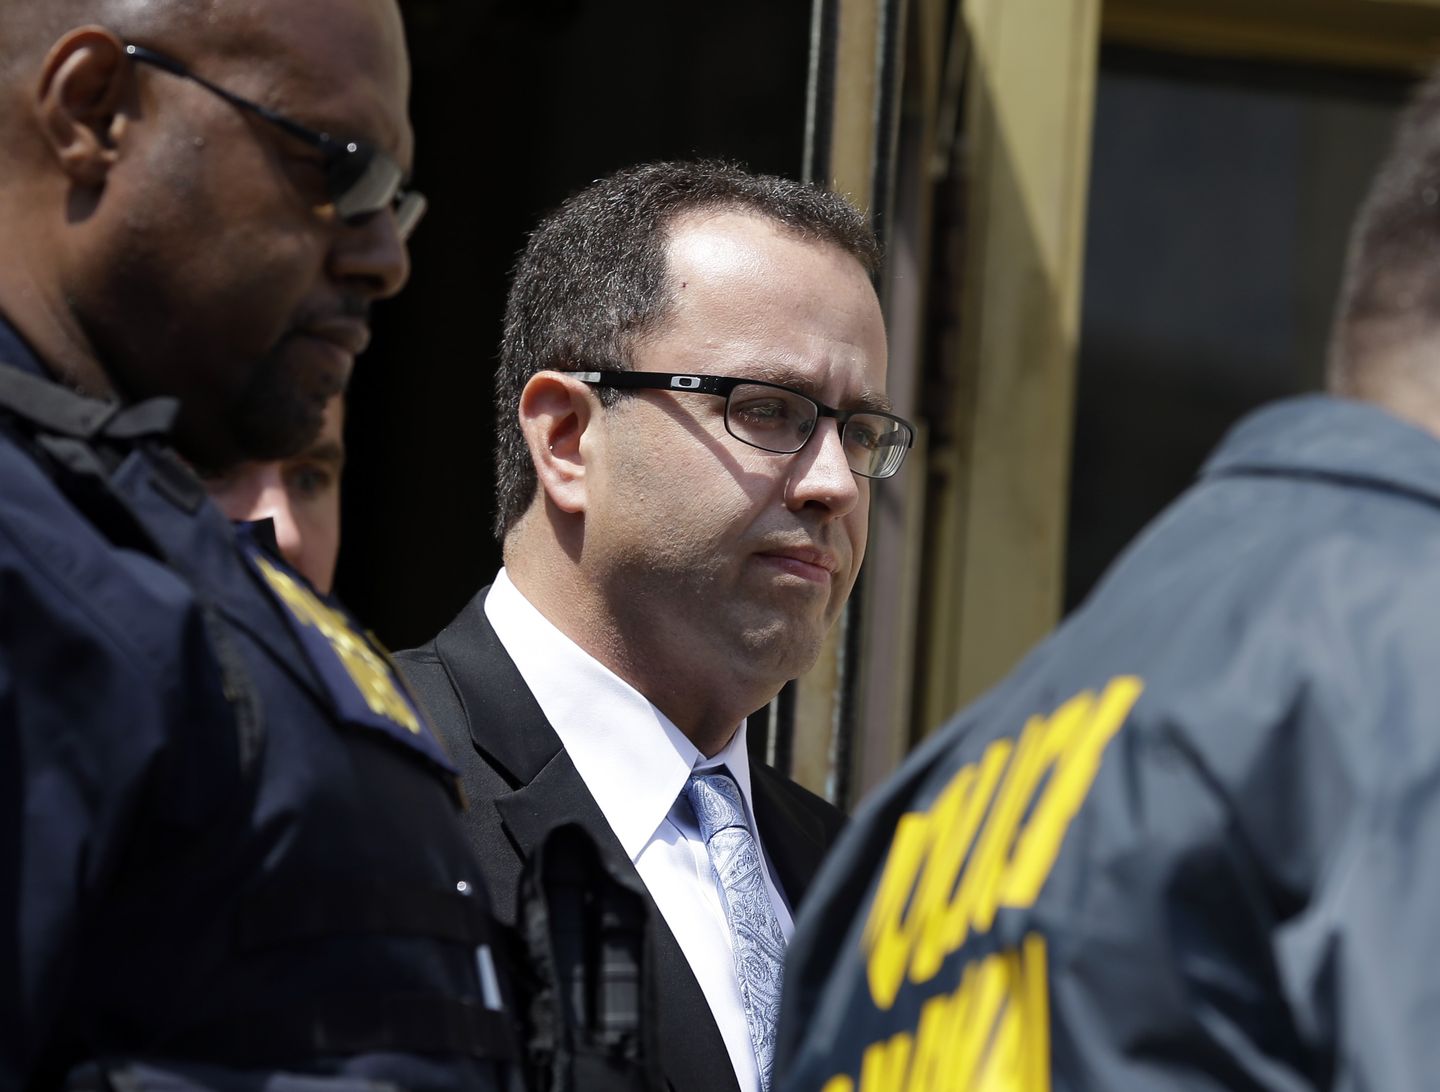 Associate of ex-Subway pitchman Jared Fogle sentenced to 27 years in prison